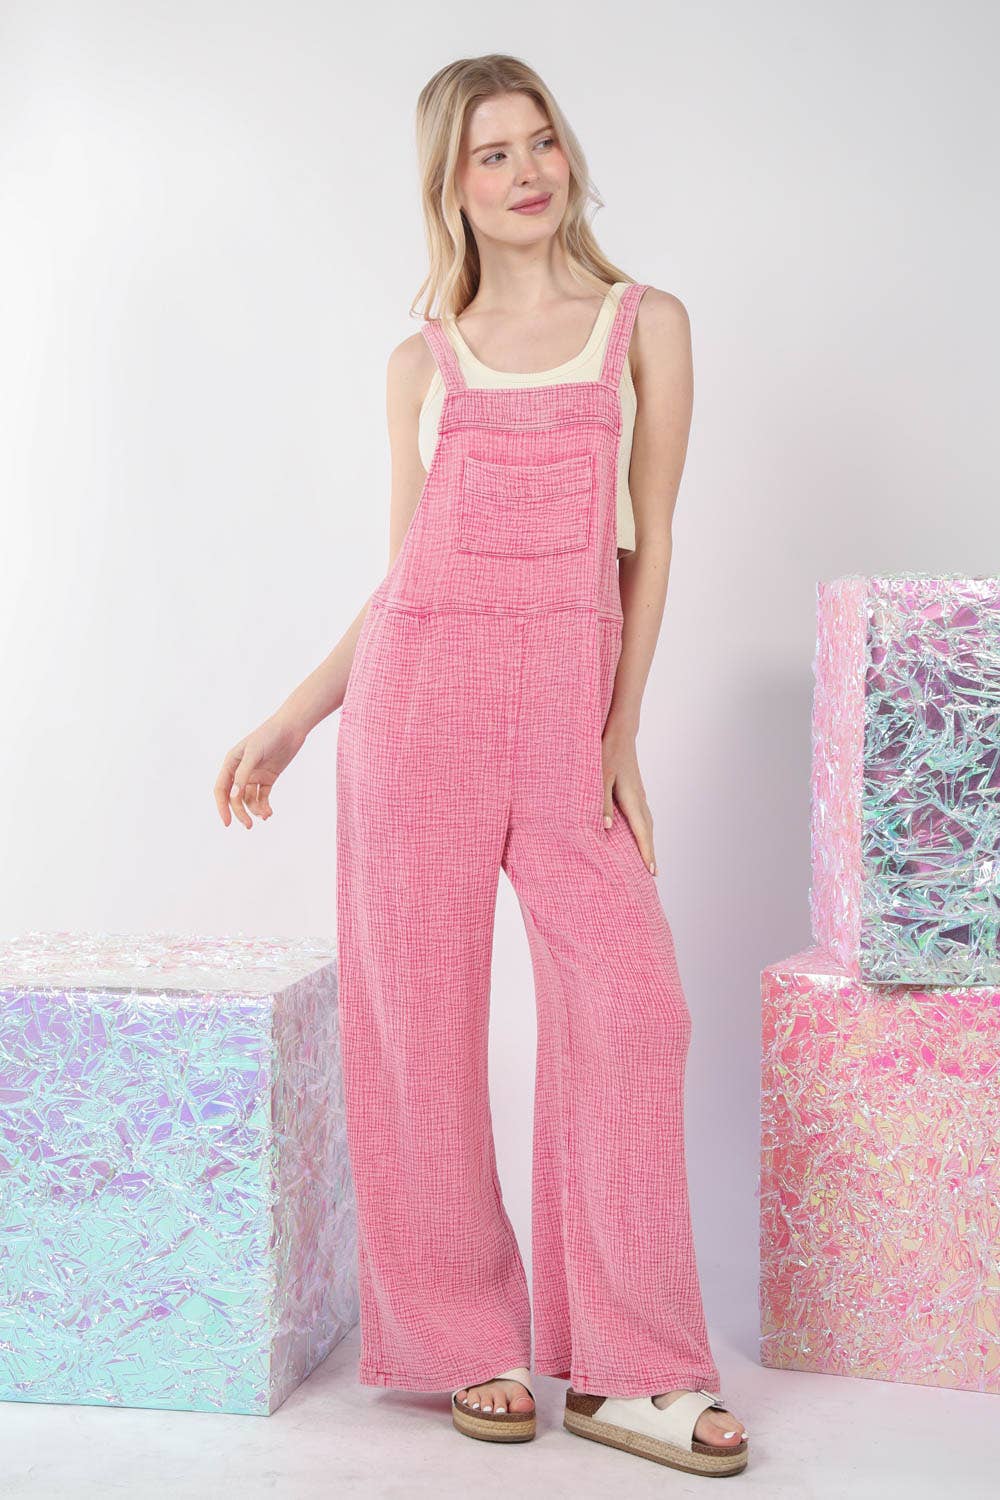 Pink Jrs. XL Bib OVERALL Pants Petal Pink Dyed Upcycled No